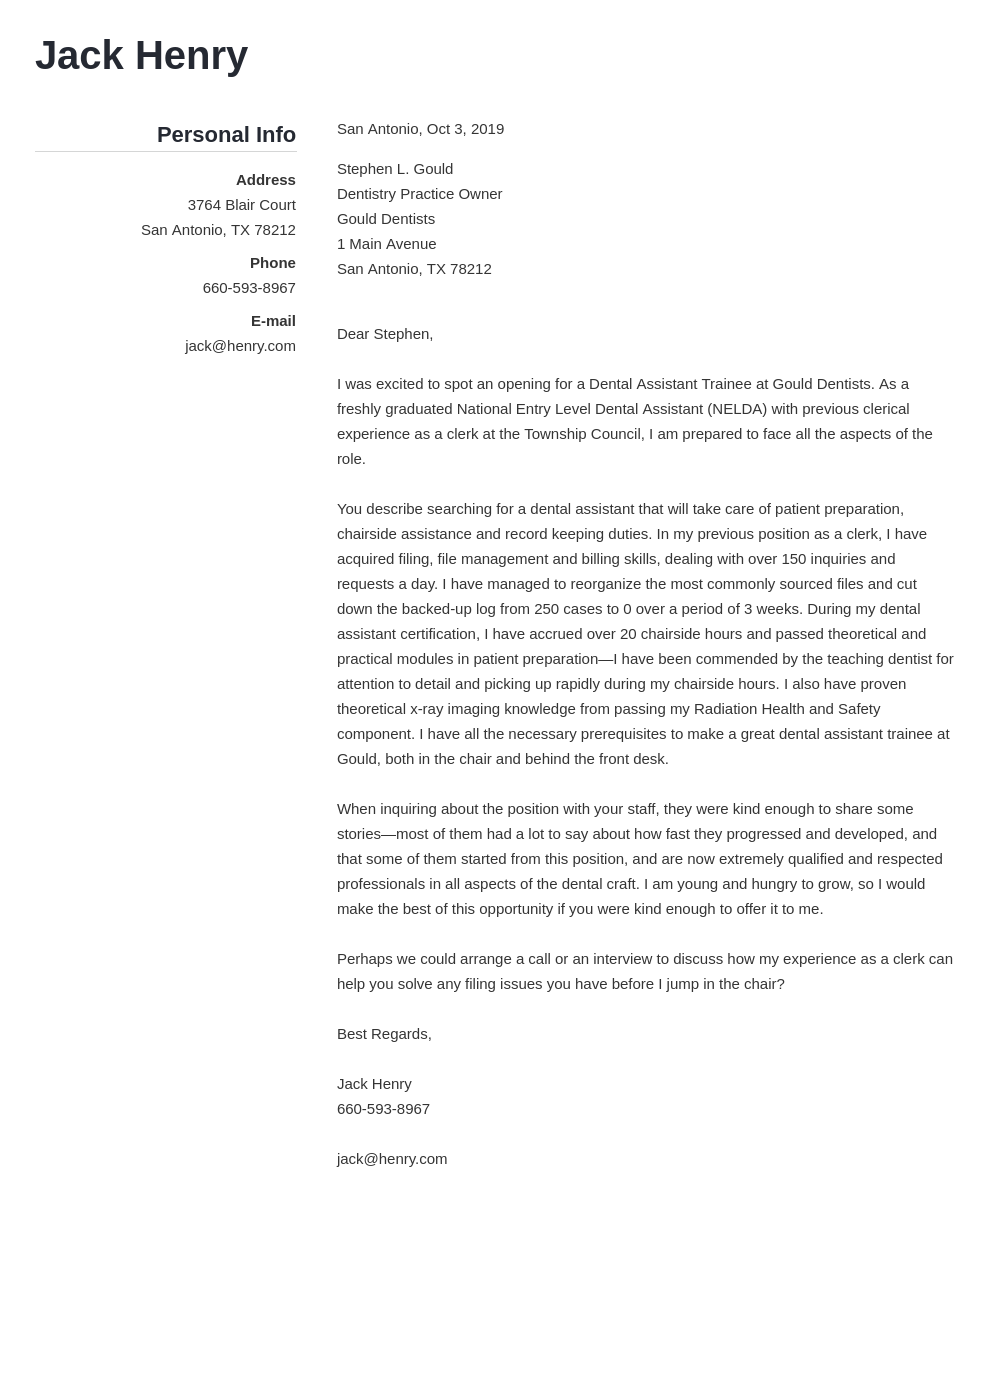 Dental Assistant Cover Letter: Sample & Templates to Fill